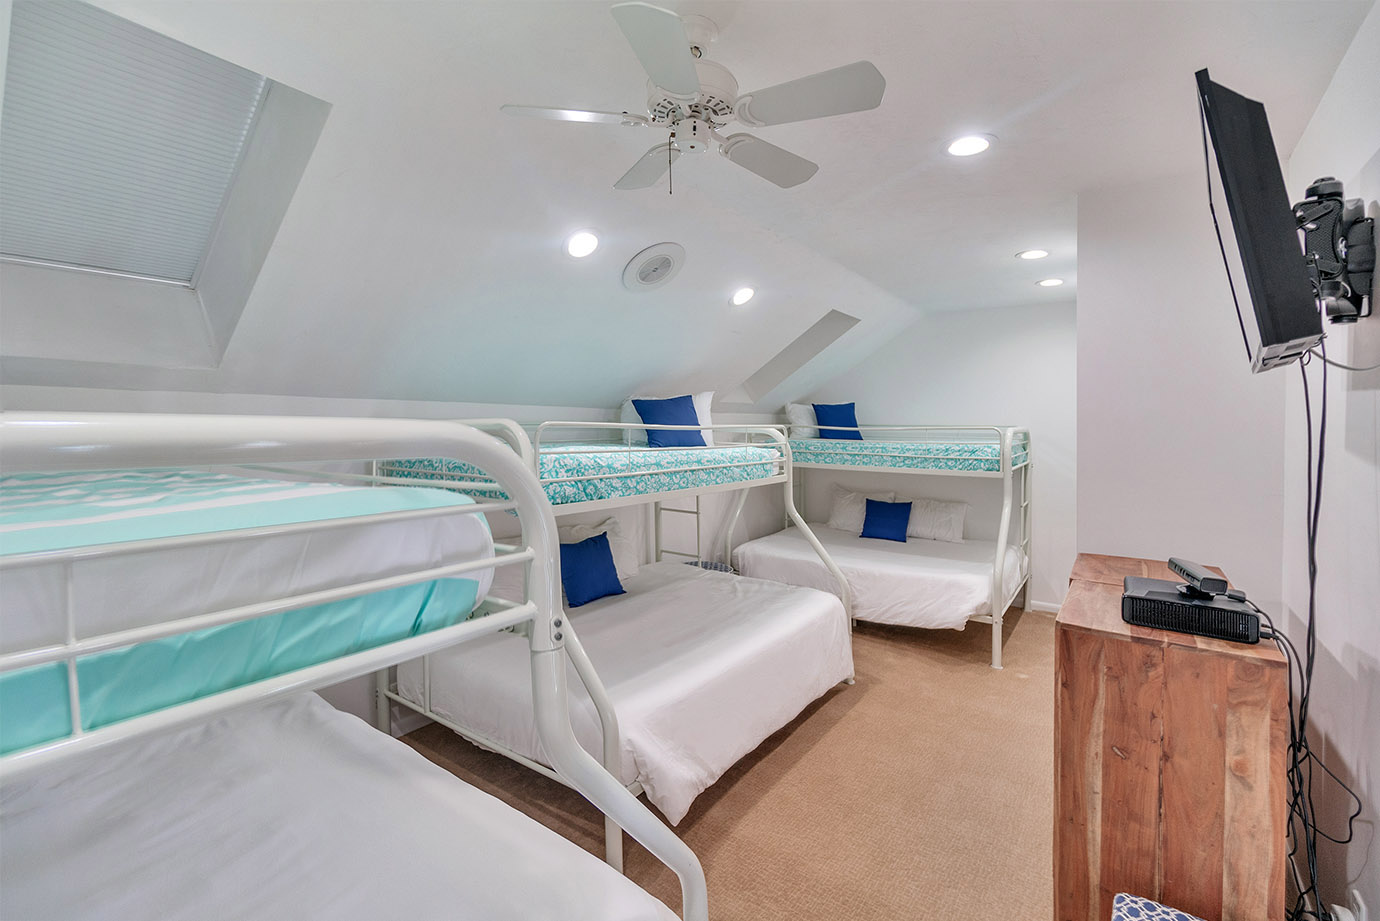 Bedroom in the Sea Oats Estate in Captiva Island with three bunk beds white white and blue linens with a wooden dresser and television on the wall